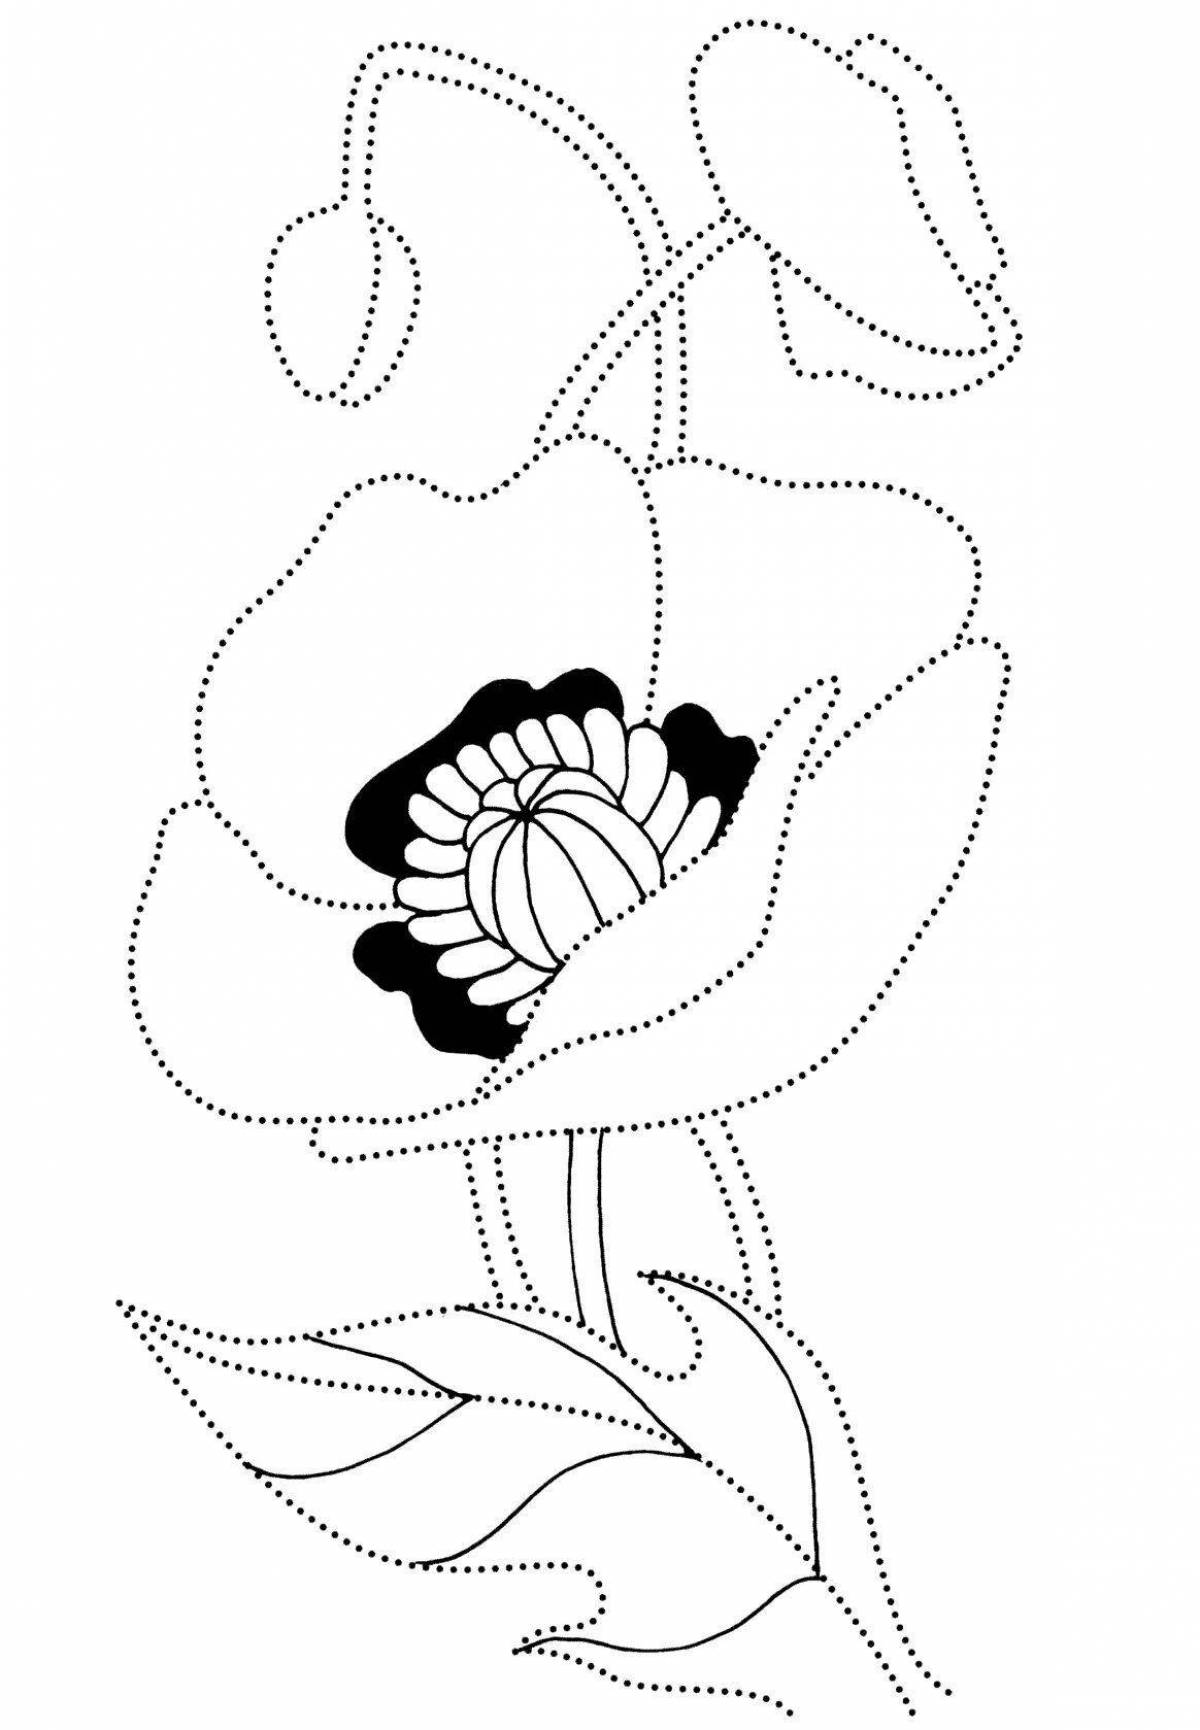 Coloring book shiny poppy flower